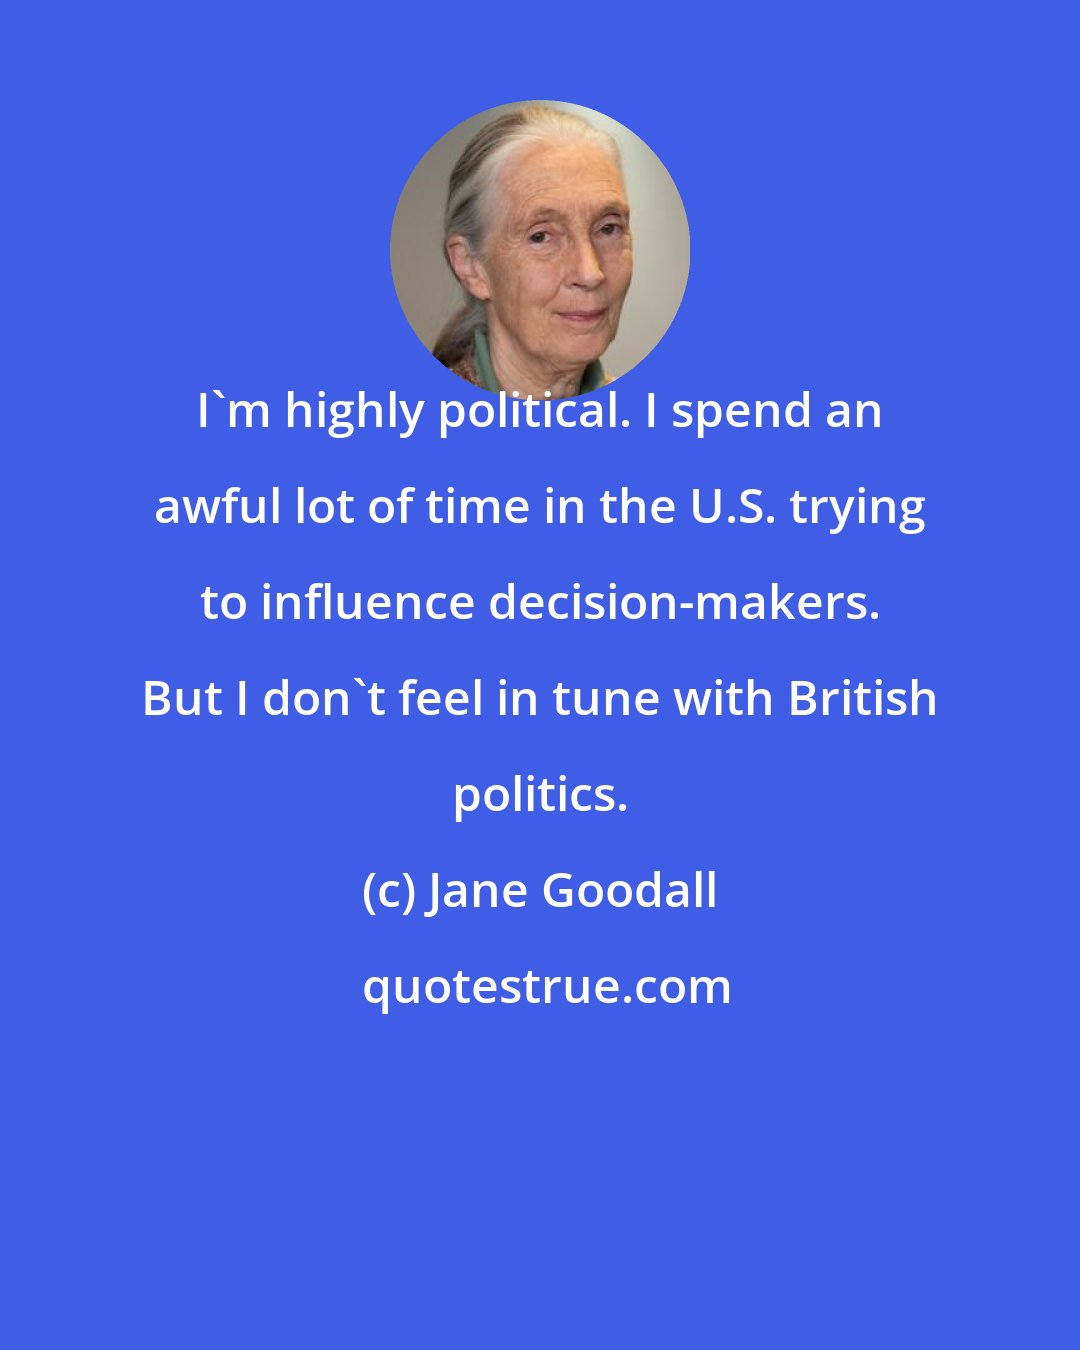 Jane Goodall: I'm highly political. I spend an awful lot of time in the U.S. trying to influence decision-makers. But I don't feel in tune with British politics.